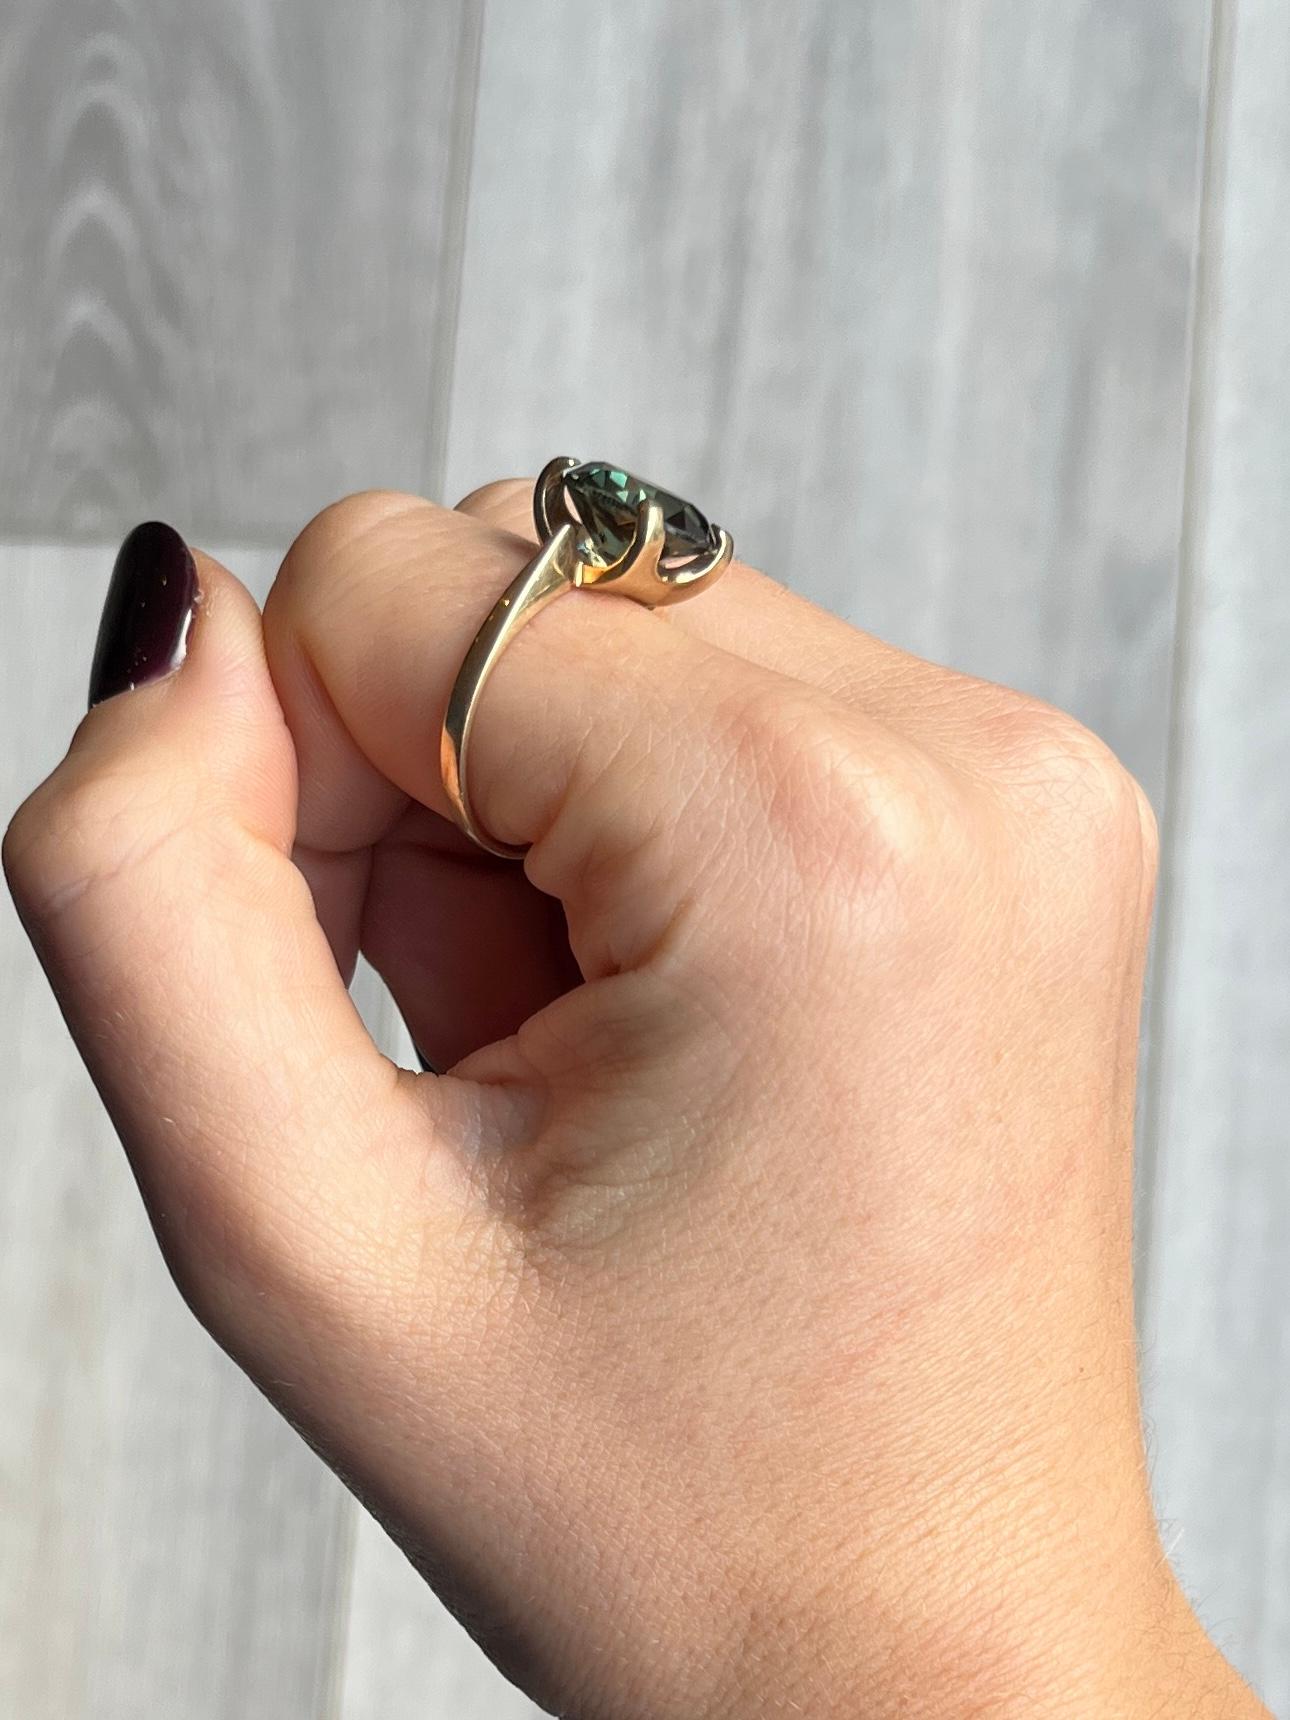 The gorgeous deep green tourmaline stone is set within four claws and measures 6carat. The ring is modelled in 9carat gold. 

Ring Size: T 1/2 or 9 3/4 
Ston diameter: 12mm

Weight: 5g